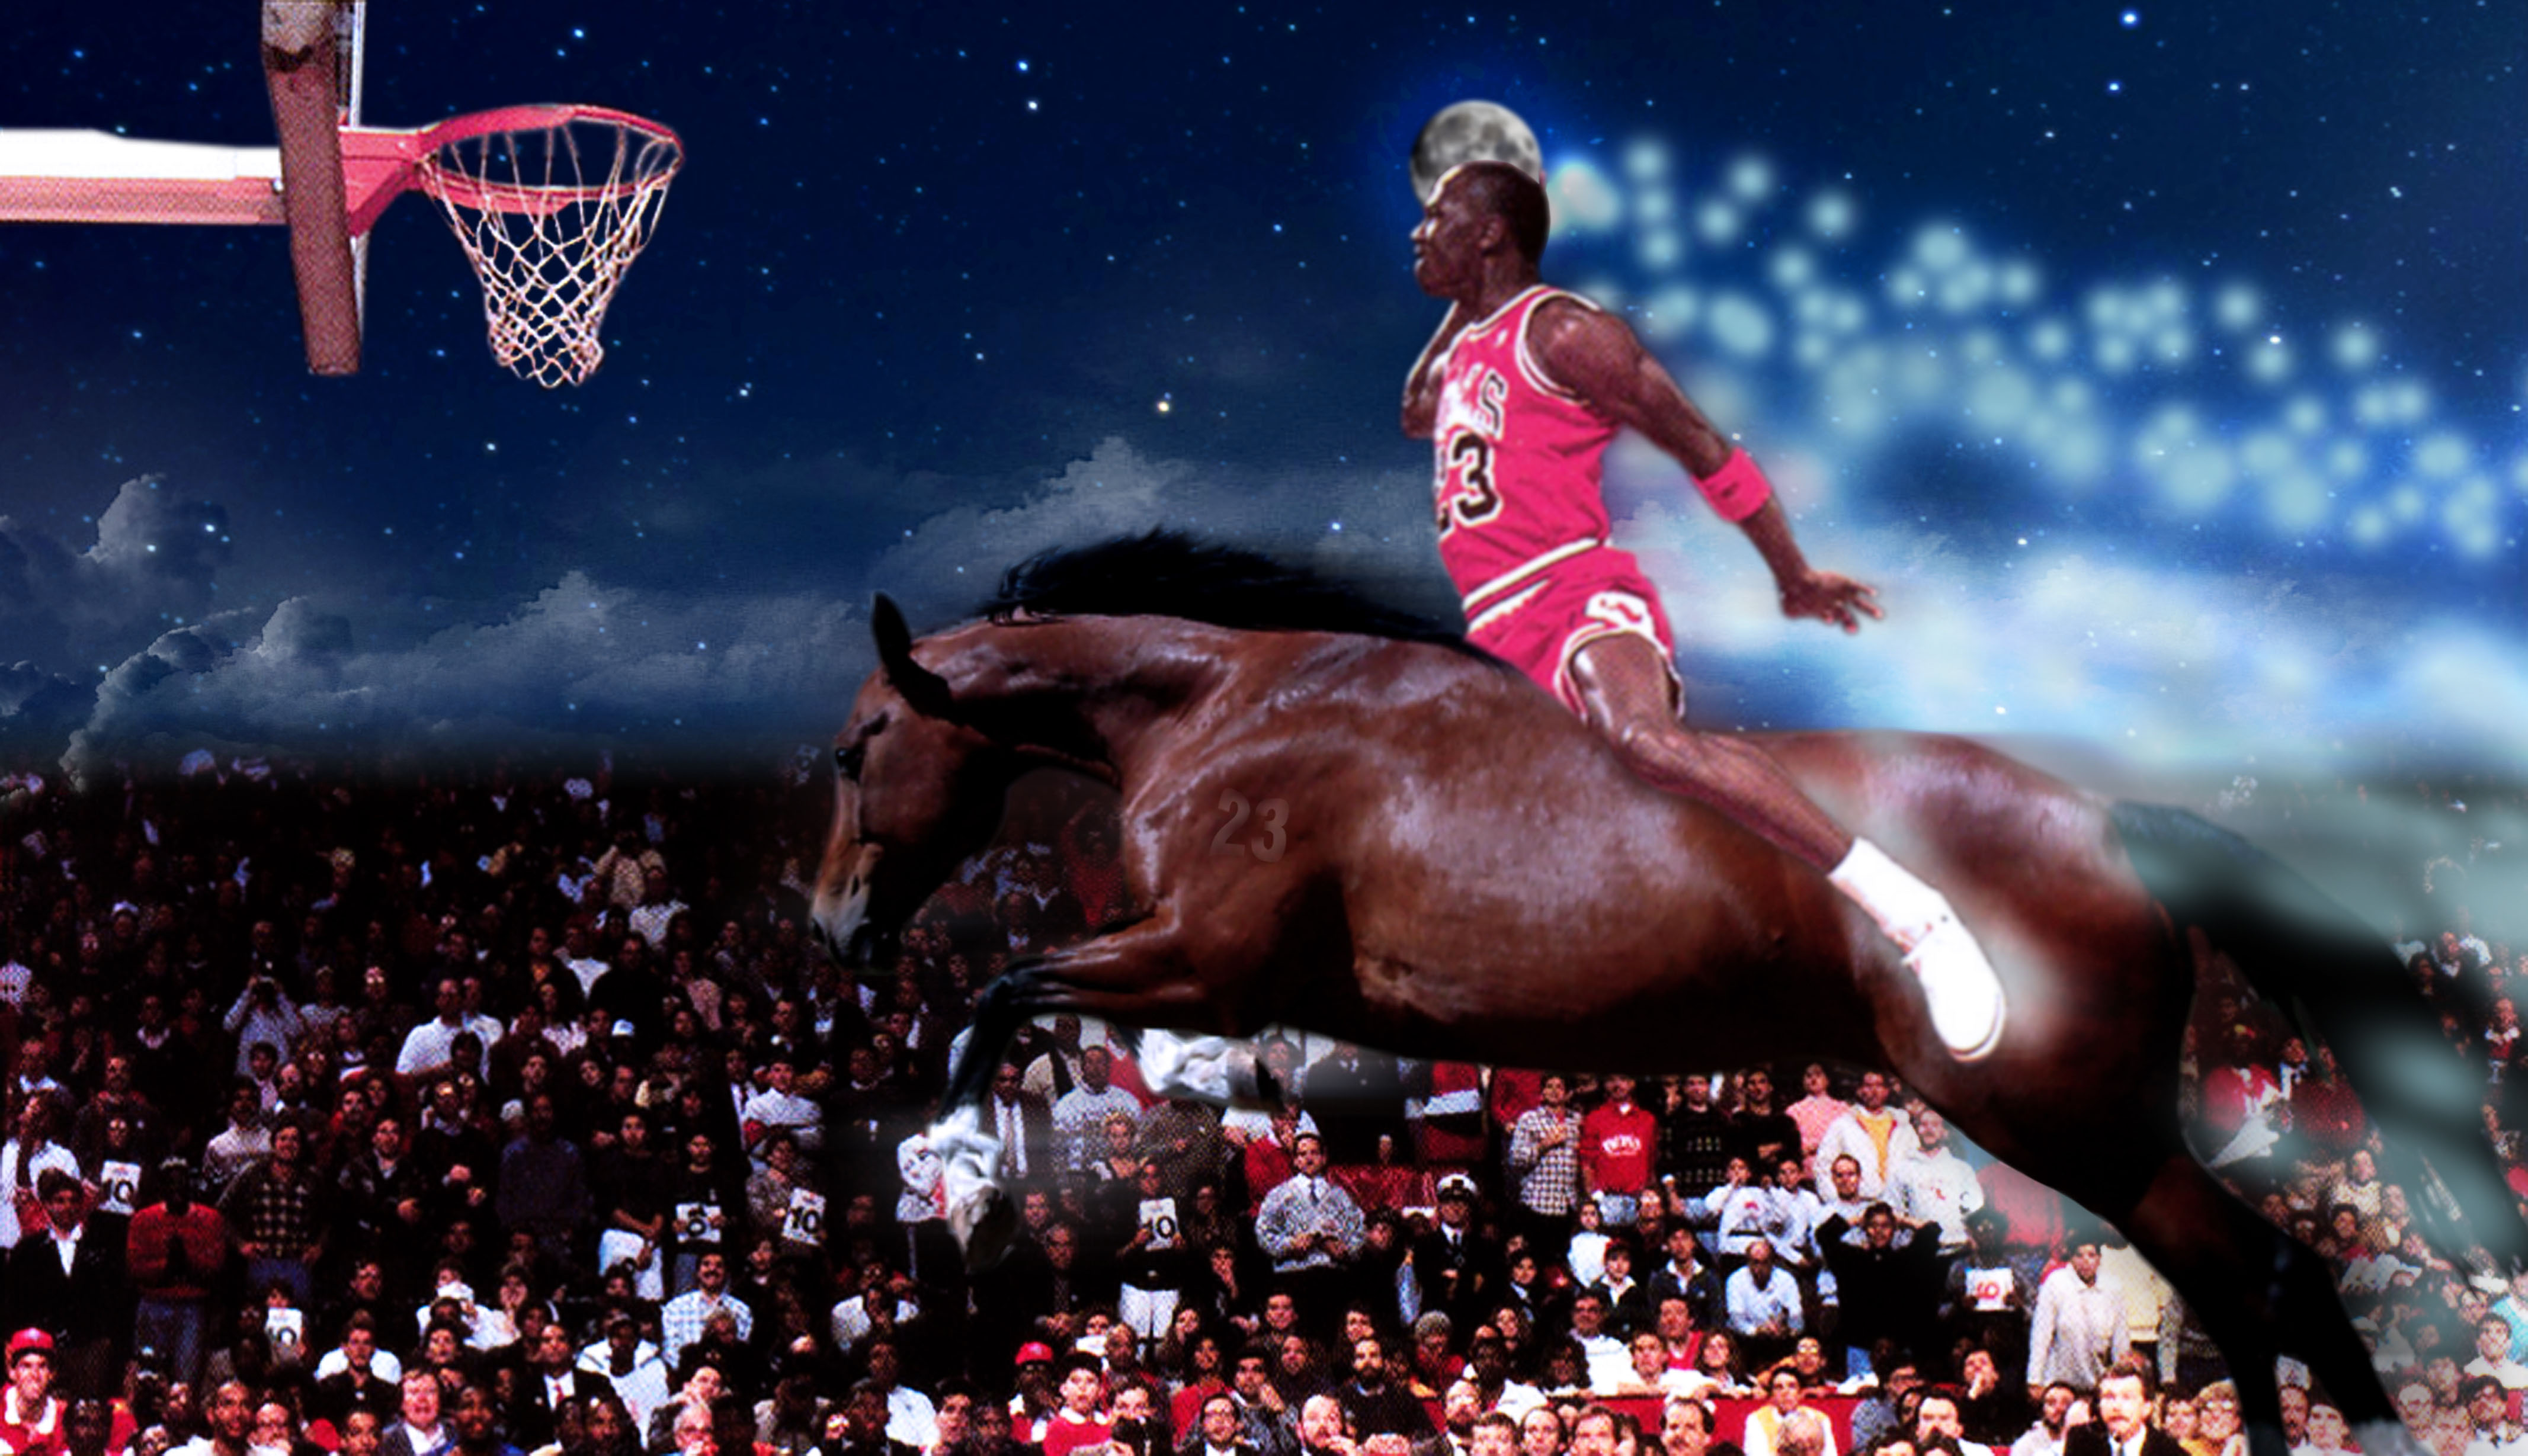 Dunked On A Horse Besides This Fantasy Picture My Favorite Jordan